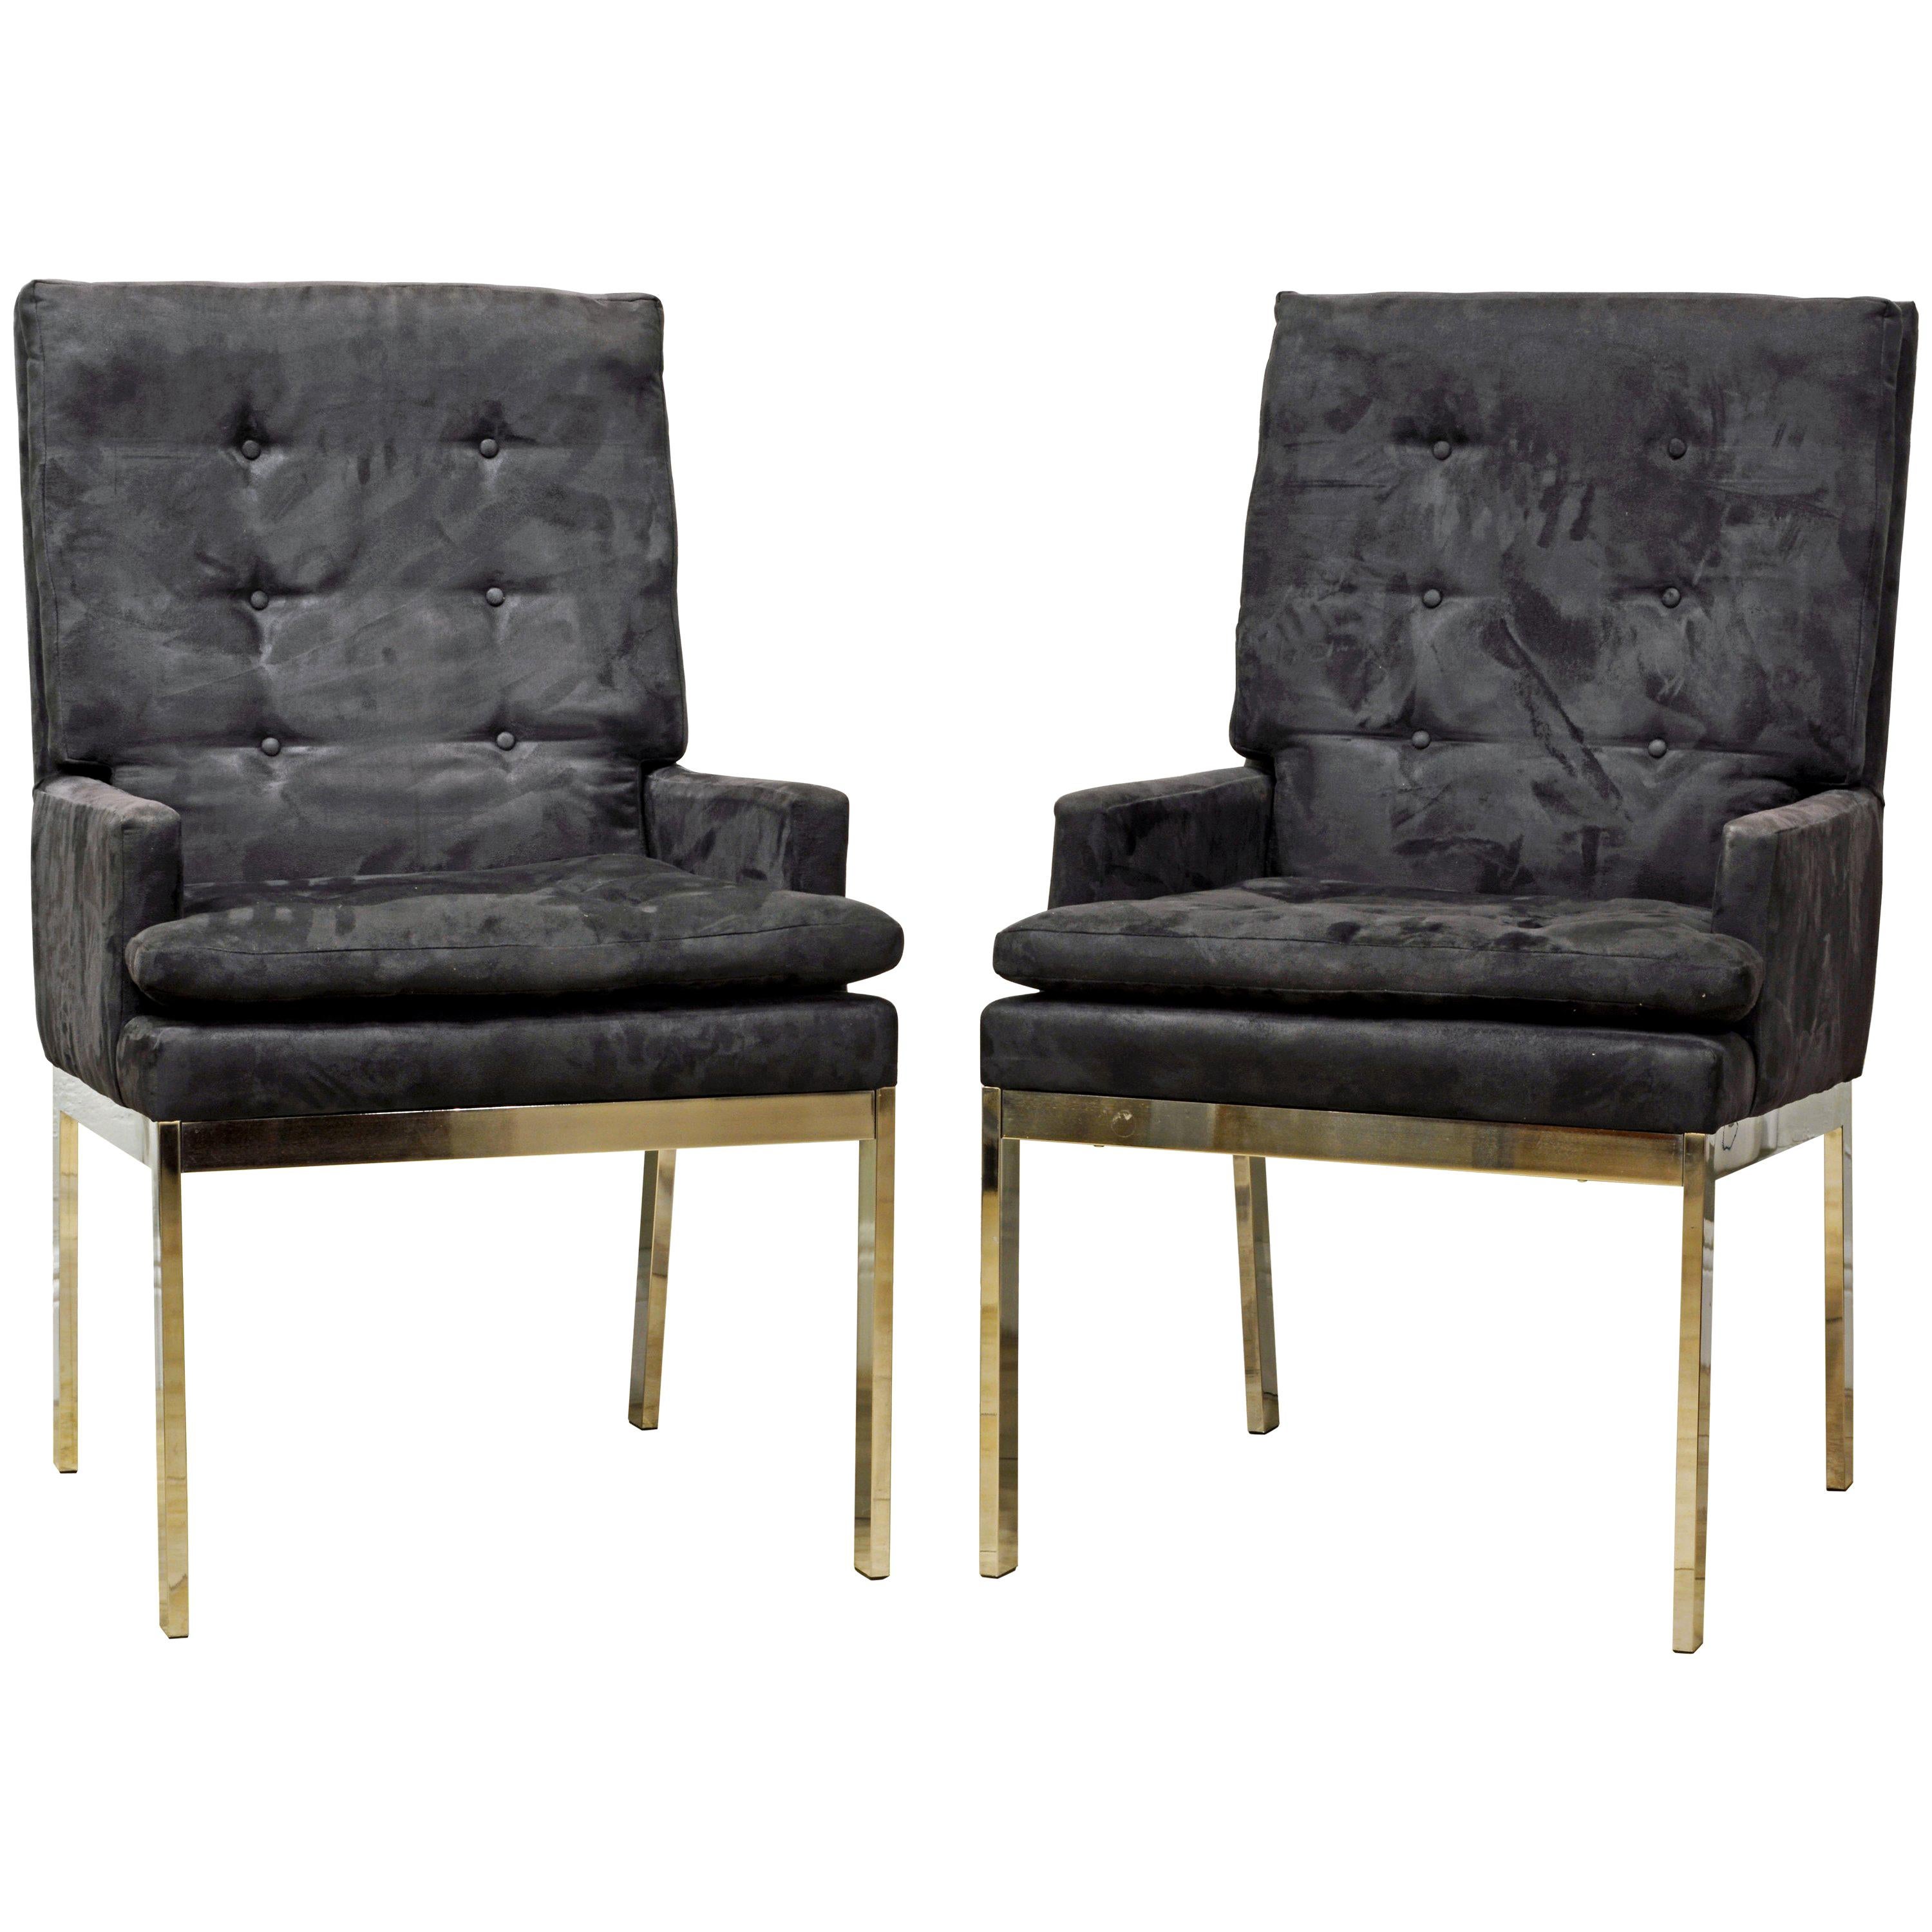 Pair of Mid-Century Modern Suede Covered Armchairs Attributed to Milo Baughman